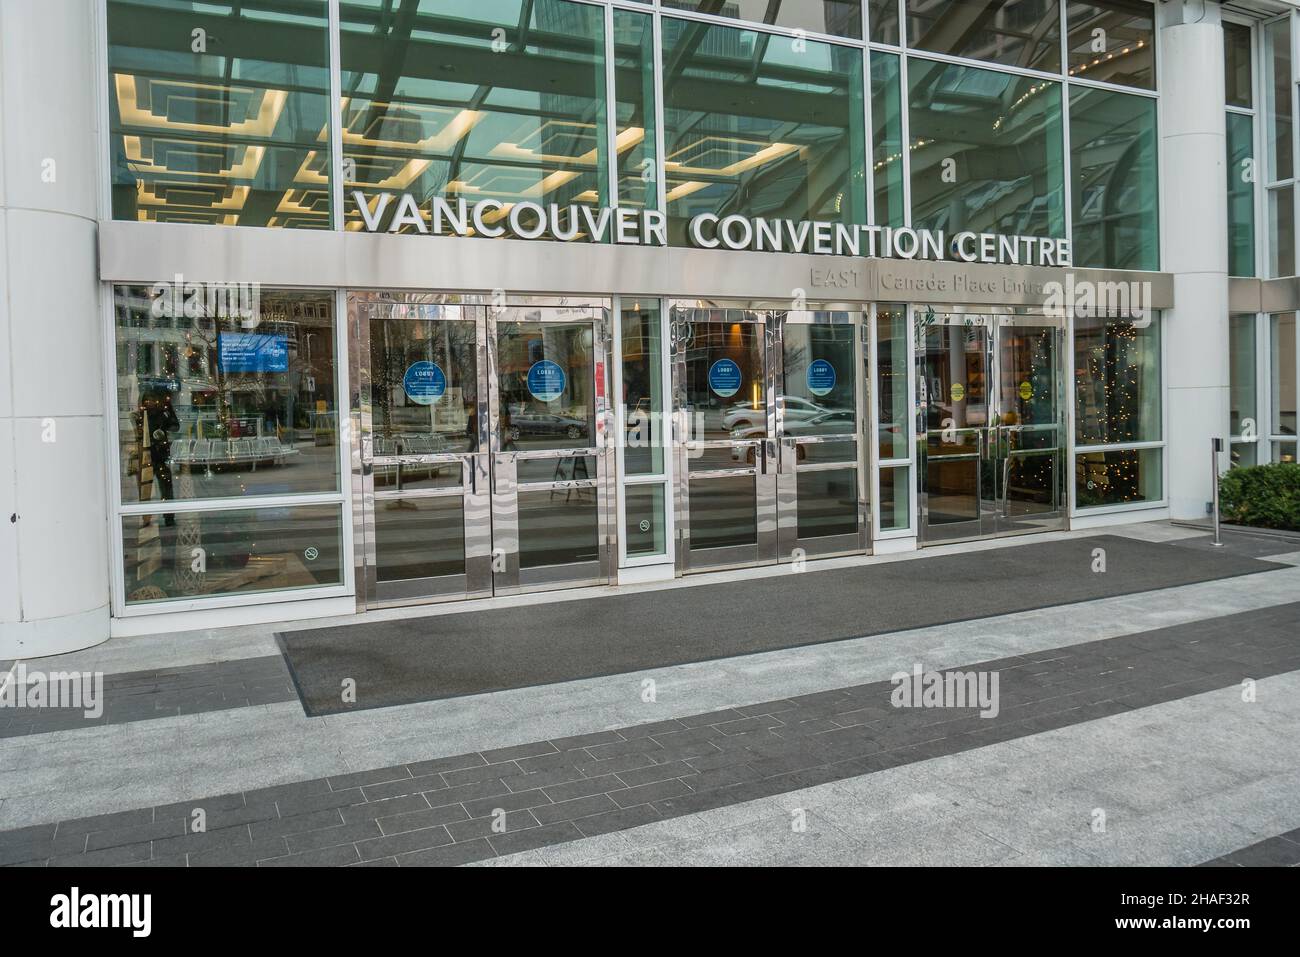 The Vancouver Convention Centre is a convention centre in Vancouver, British Columbia, Canada; it is one of Canada's largest convention centres. With Stock Photo